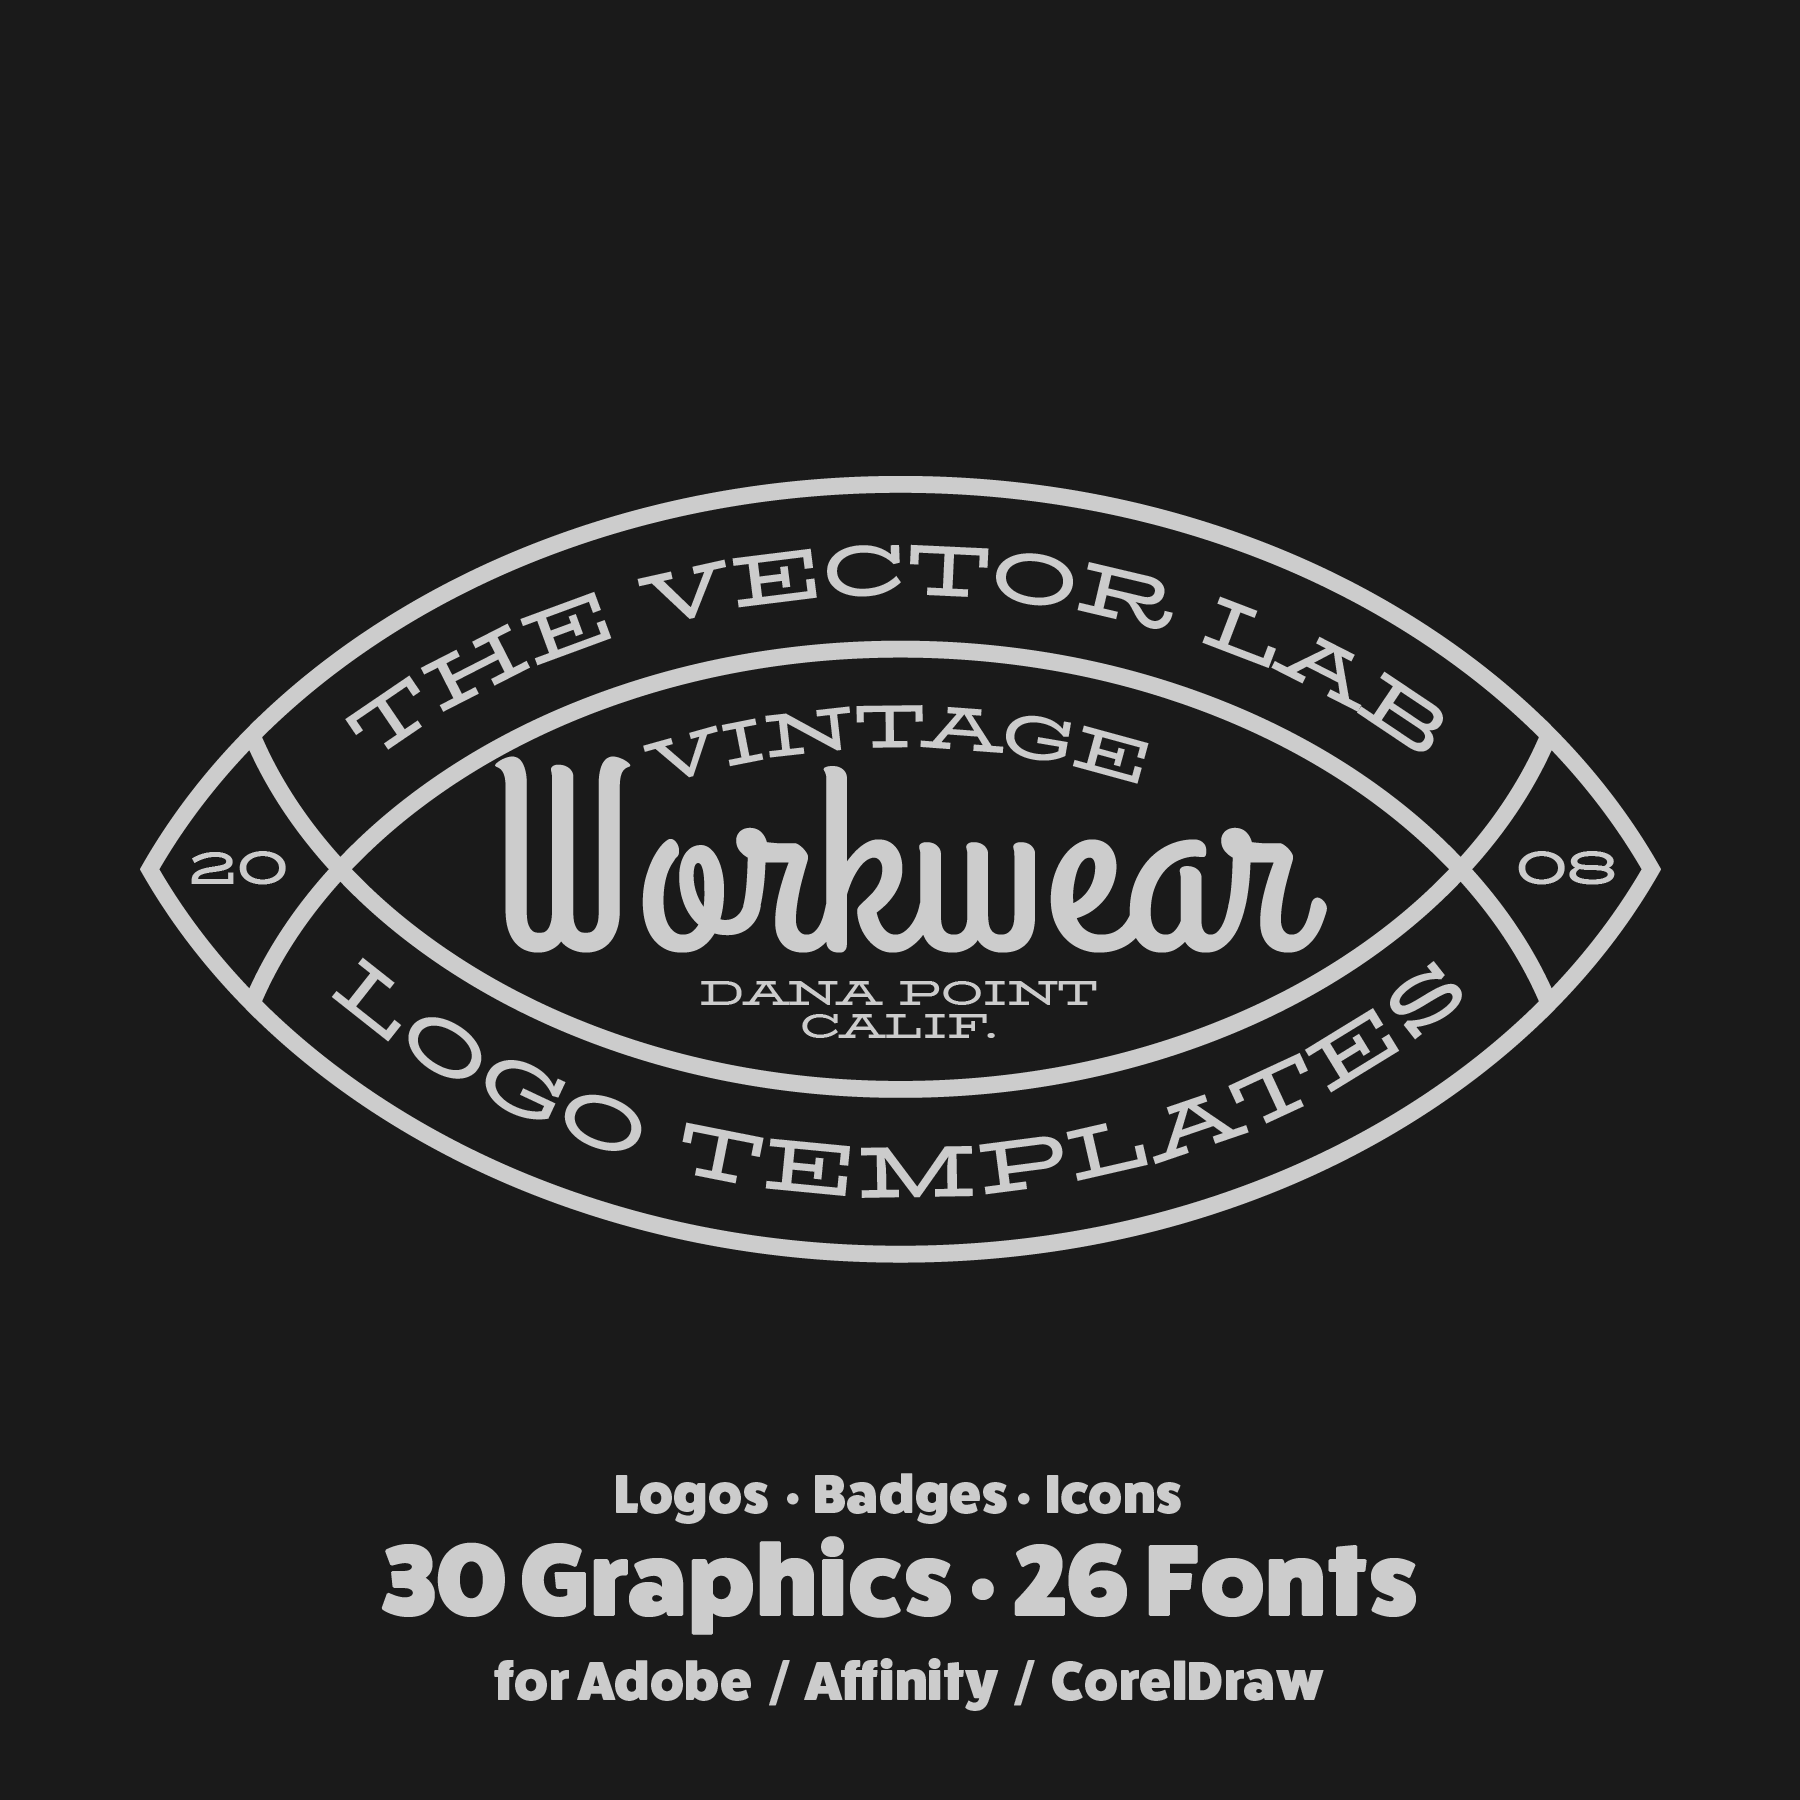 T shirt Templates Free - Graphic Design Template